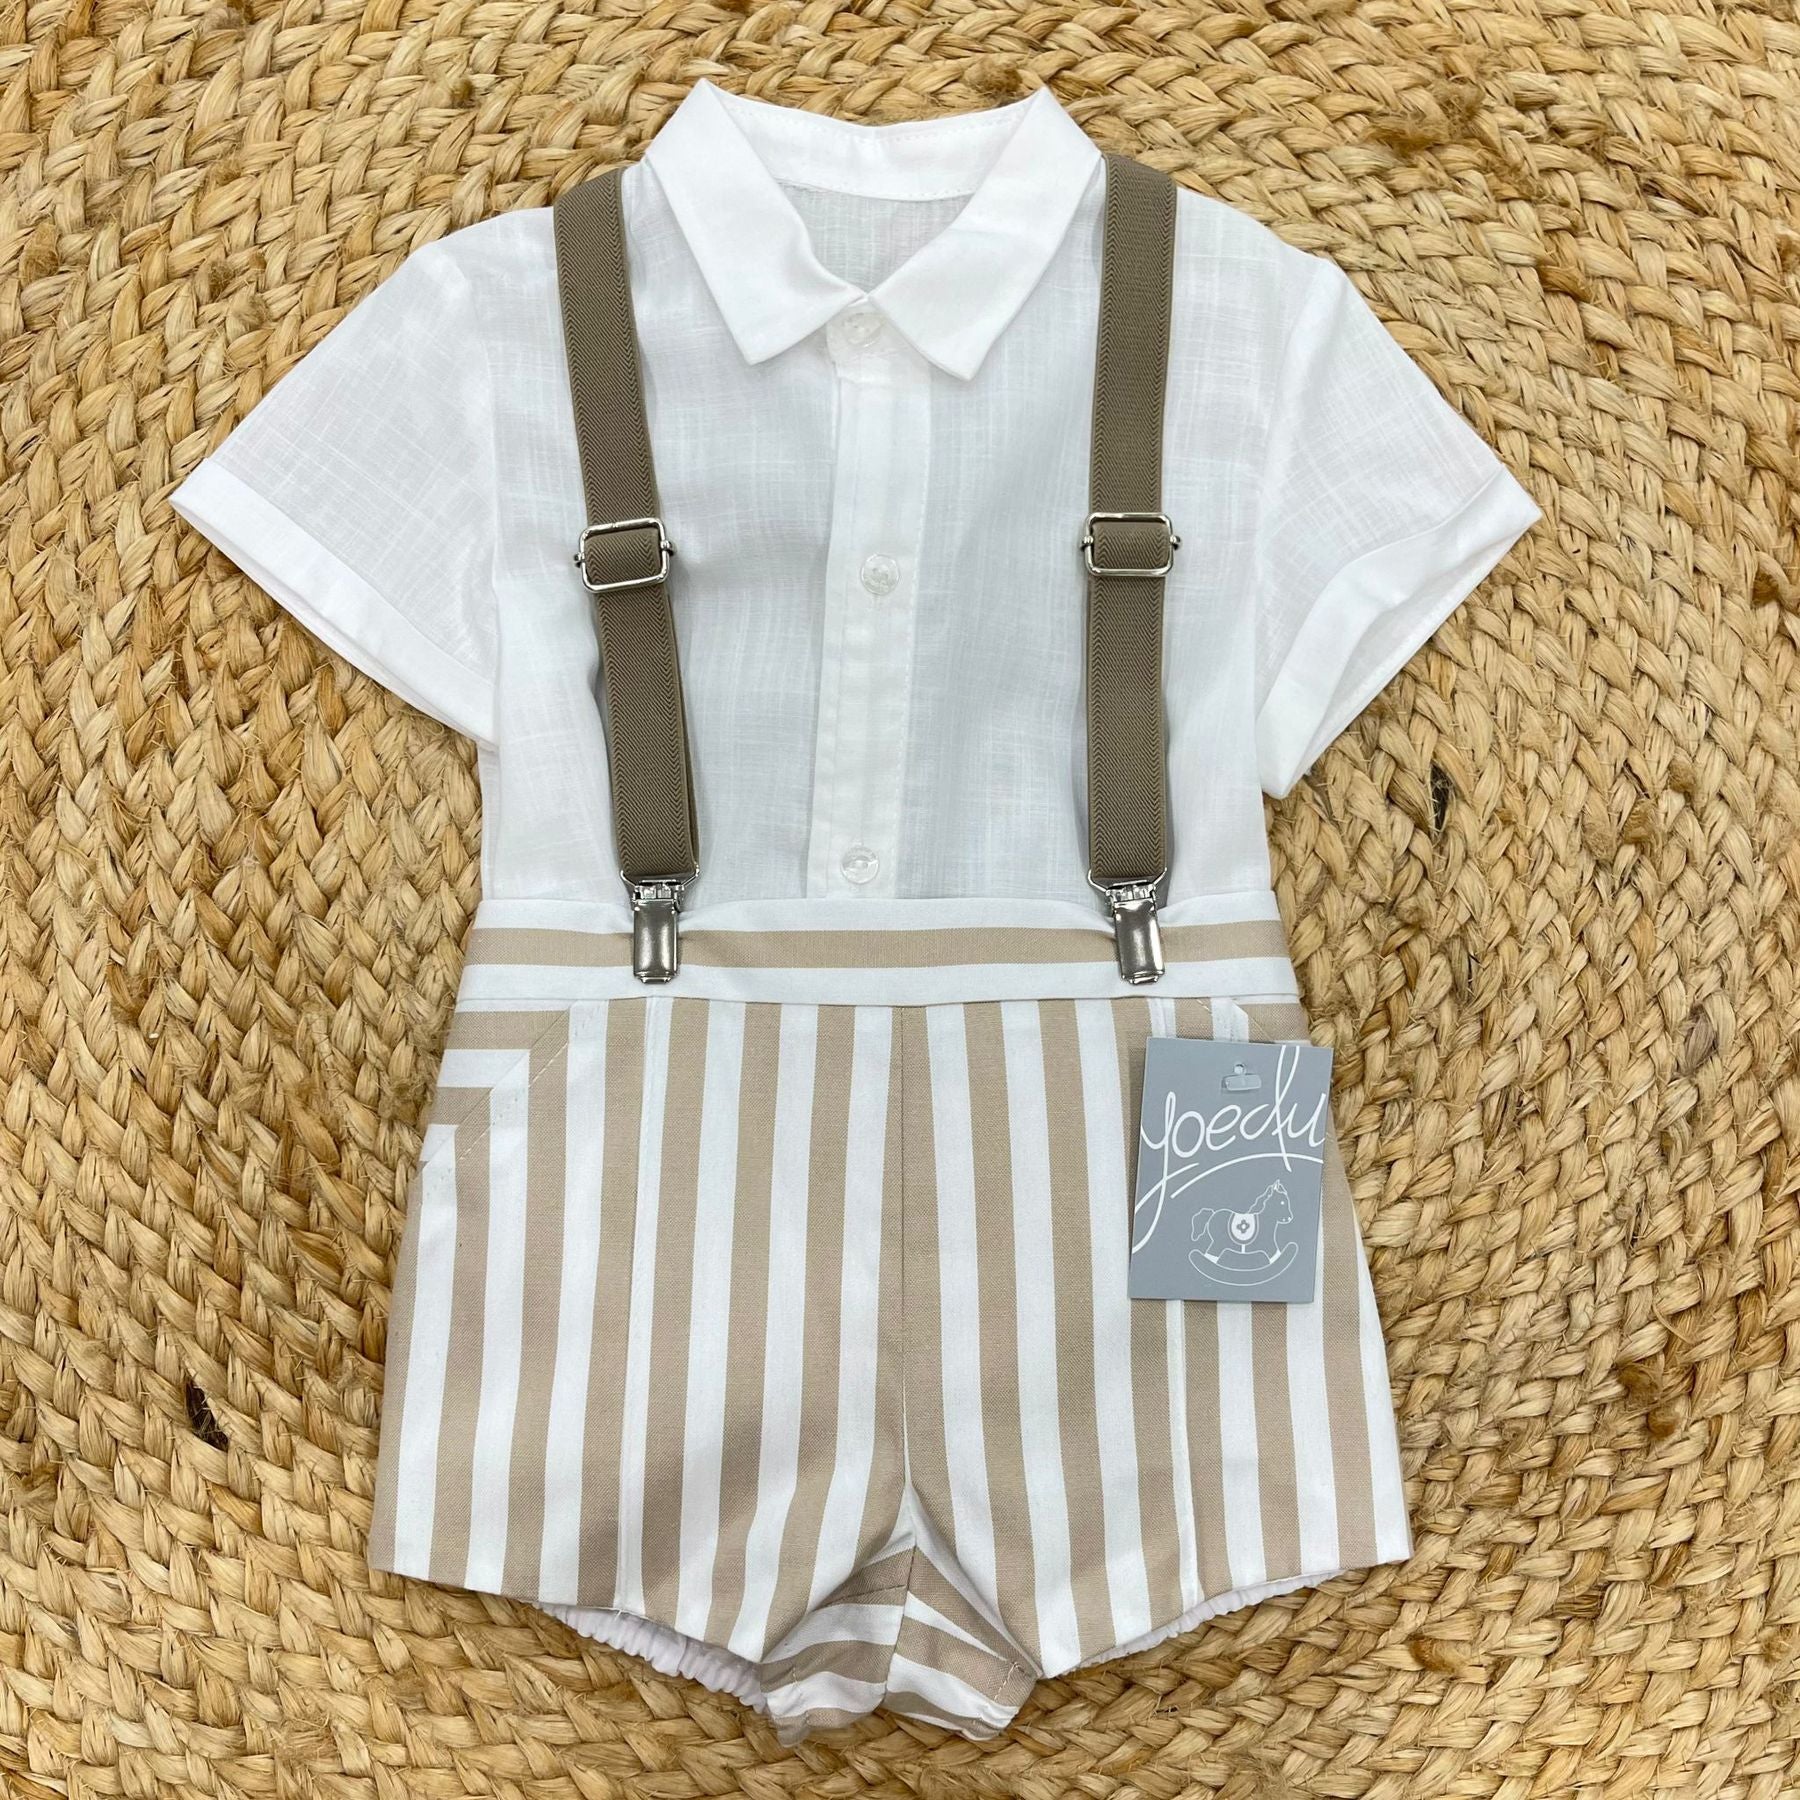 Yoedu Coulotte with striped suspenders